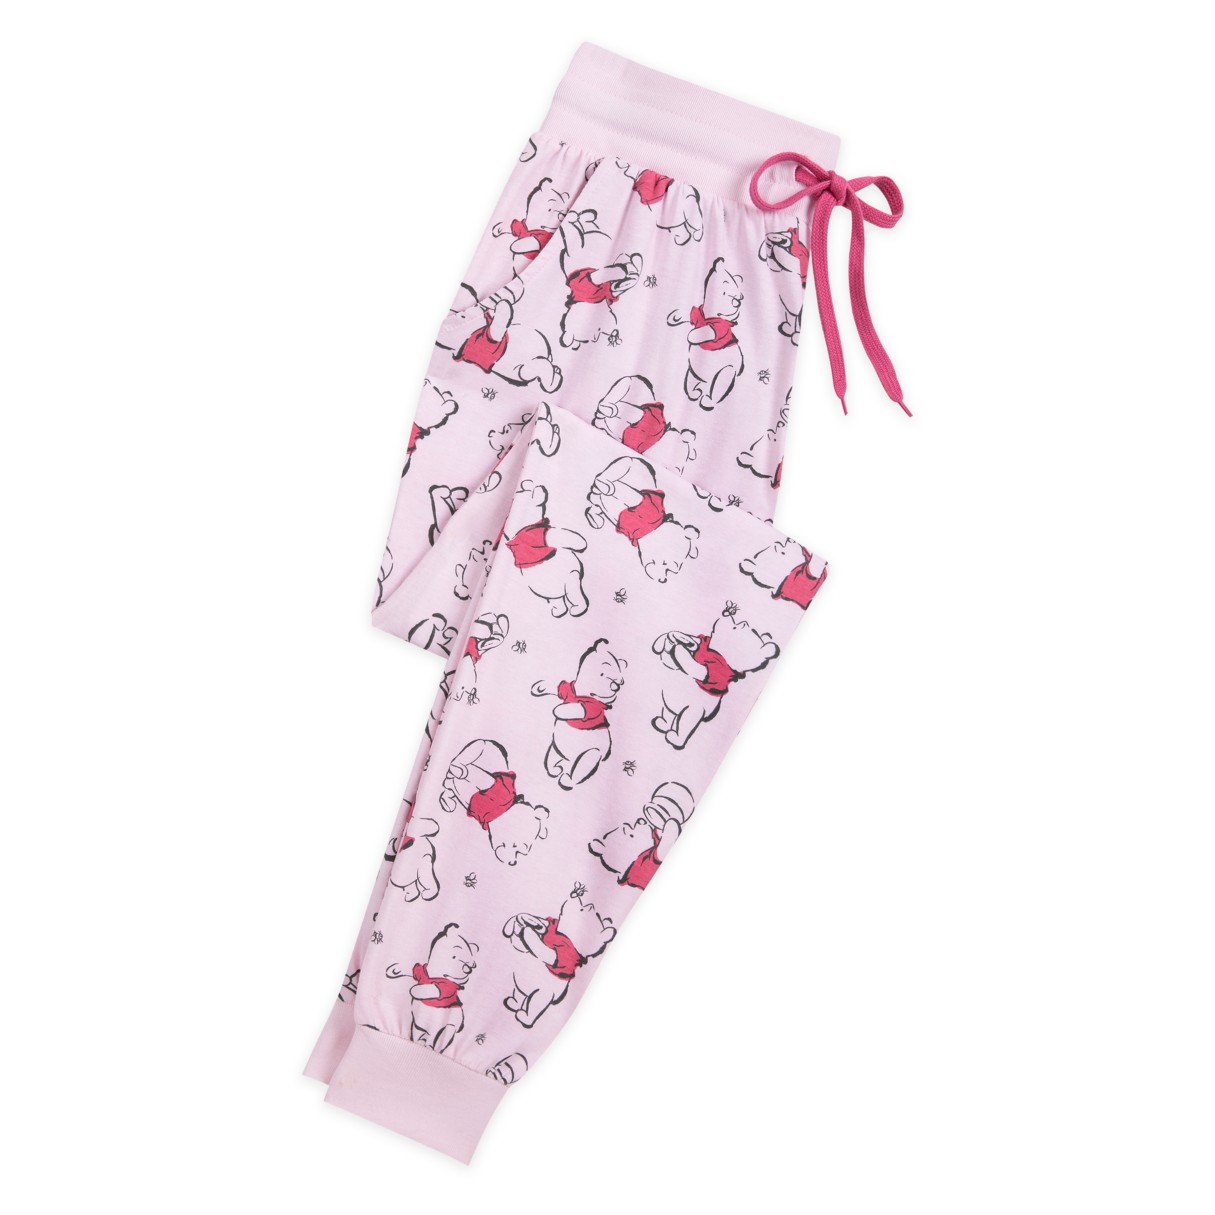 Winnie the Pooh Lounge Pants for Women